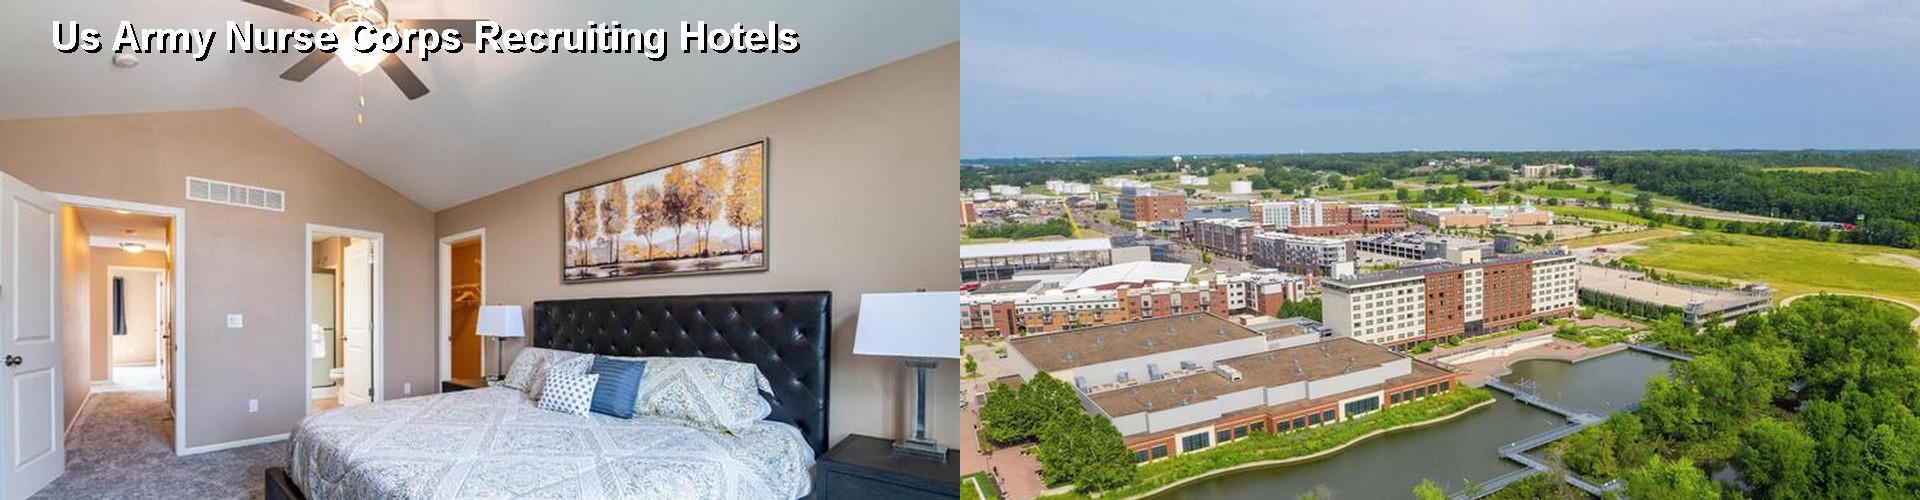 5 Best Hotels near Us Army Nurse Corps Recruiting